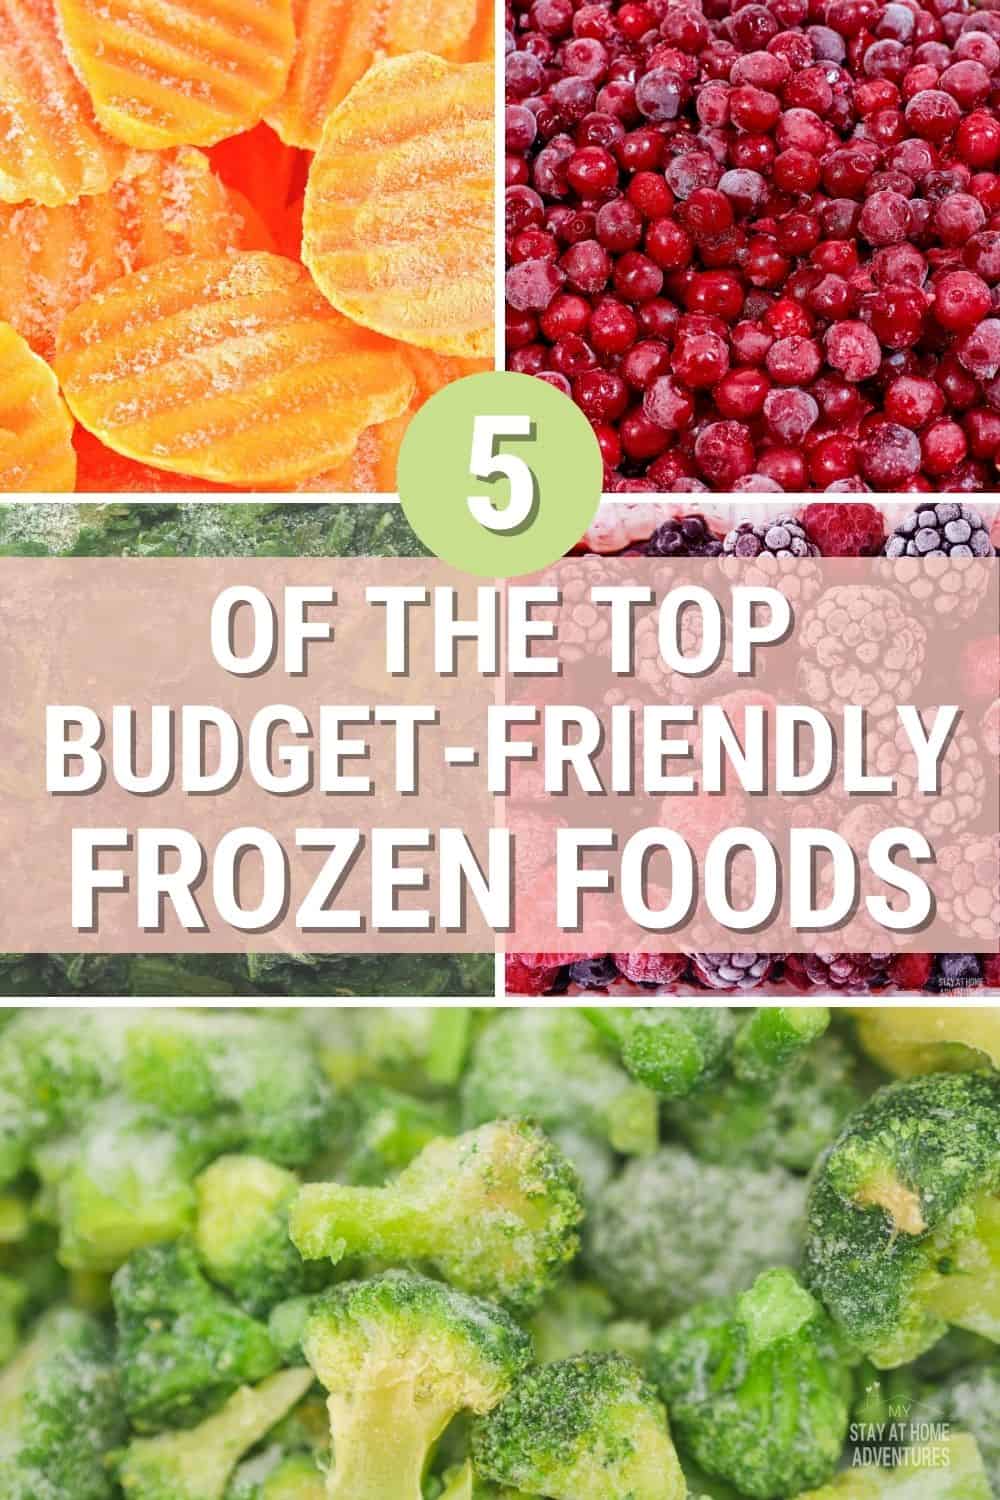 When buying frozen food, which one is good for you and your family and the budget-friendly one? Learn the top 5 best frozen foods. via @mystayathome